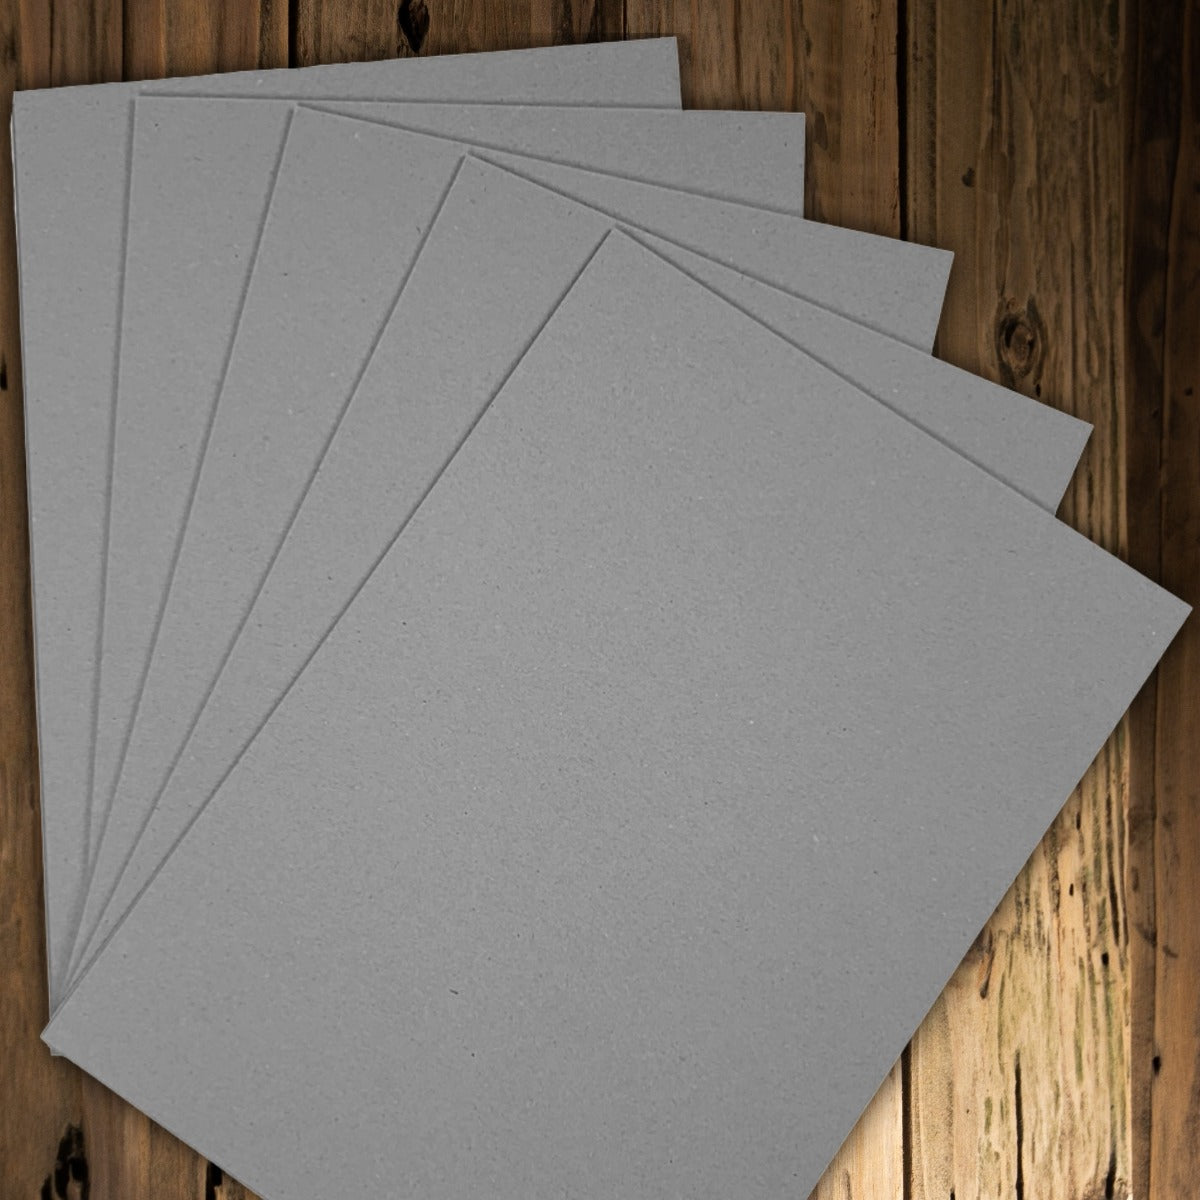 A4 Greyboard 50 Sheets 1000 Micron Recycled Card Strong Modelling & Backing Card